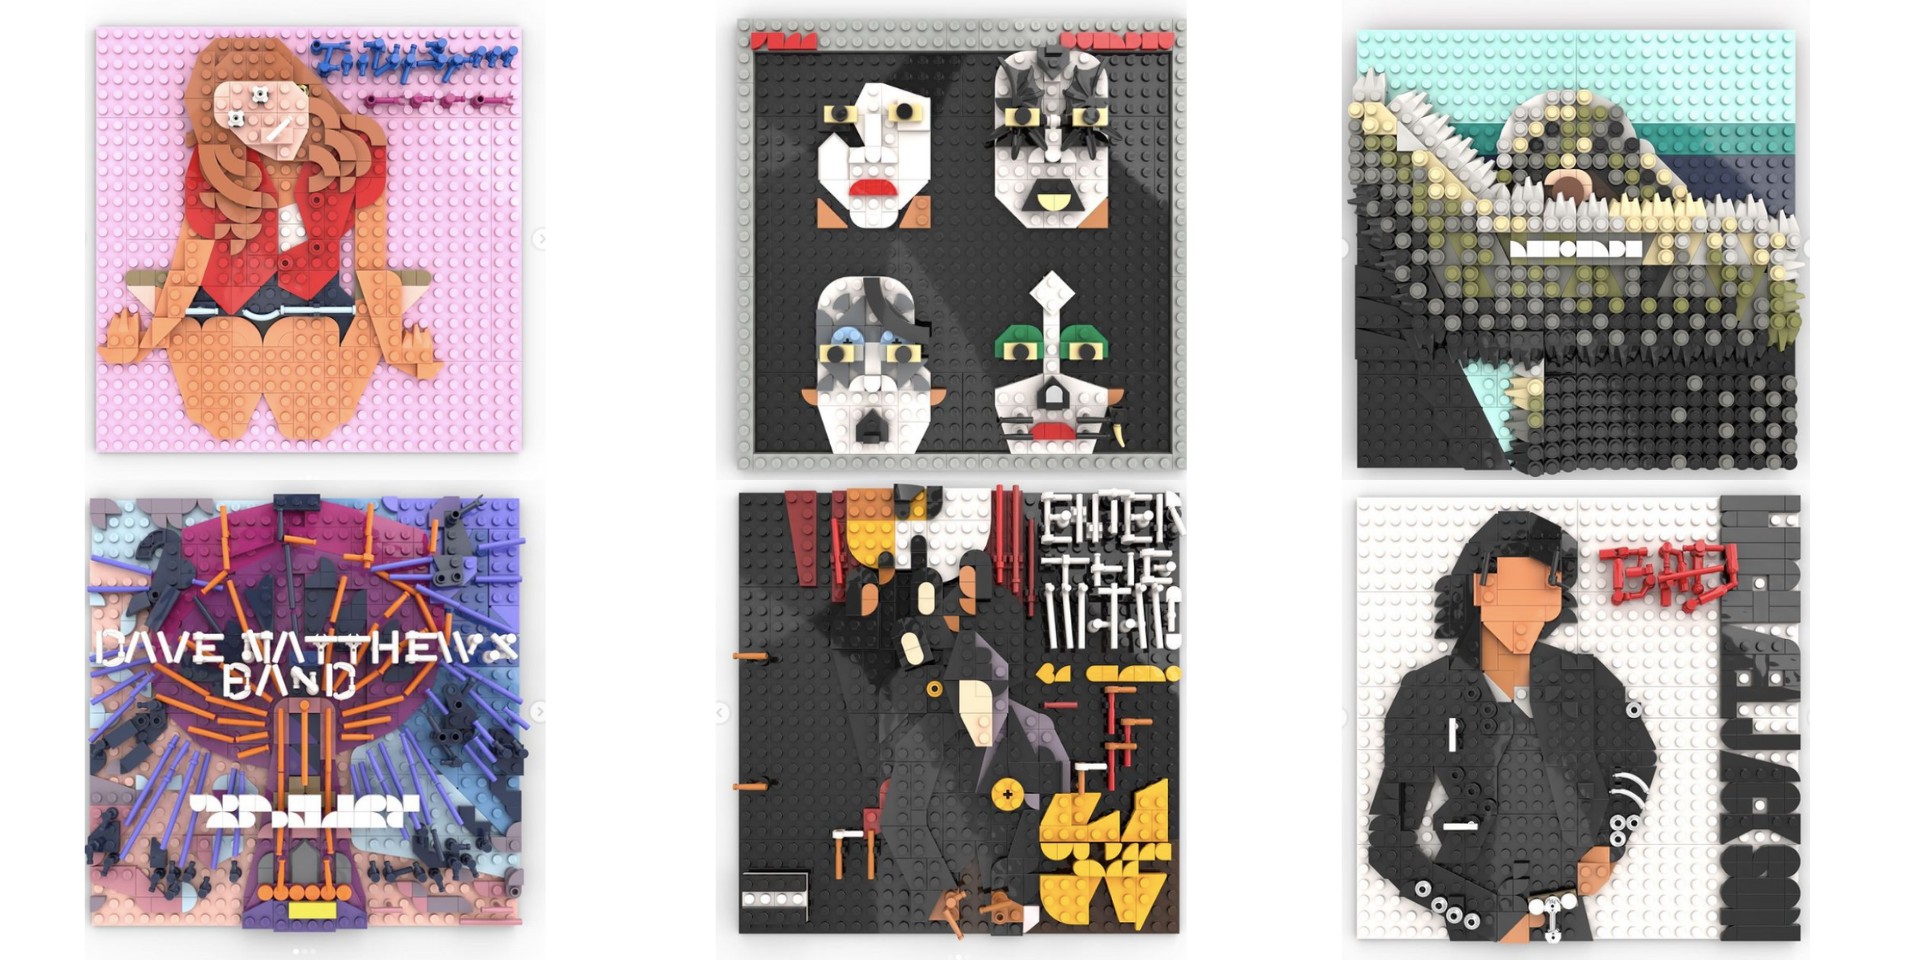 LEGO artist Adnan Lotia builds album covers of Michael Jackson, Beyoncé, Britney Spears, Radiohead, and more